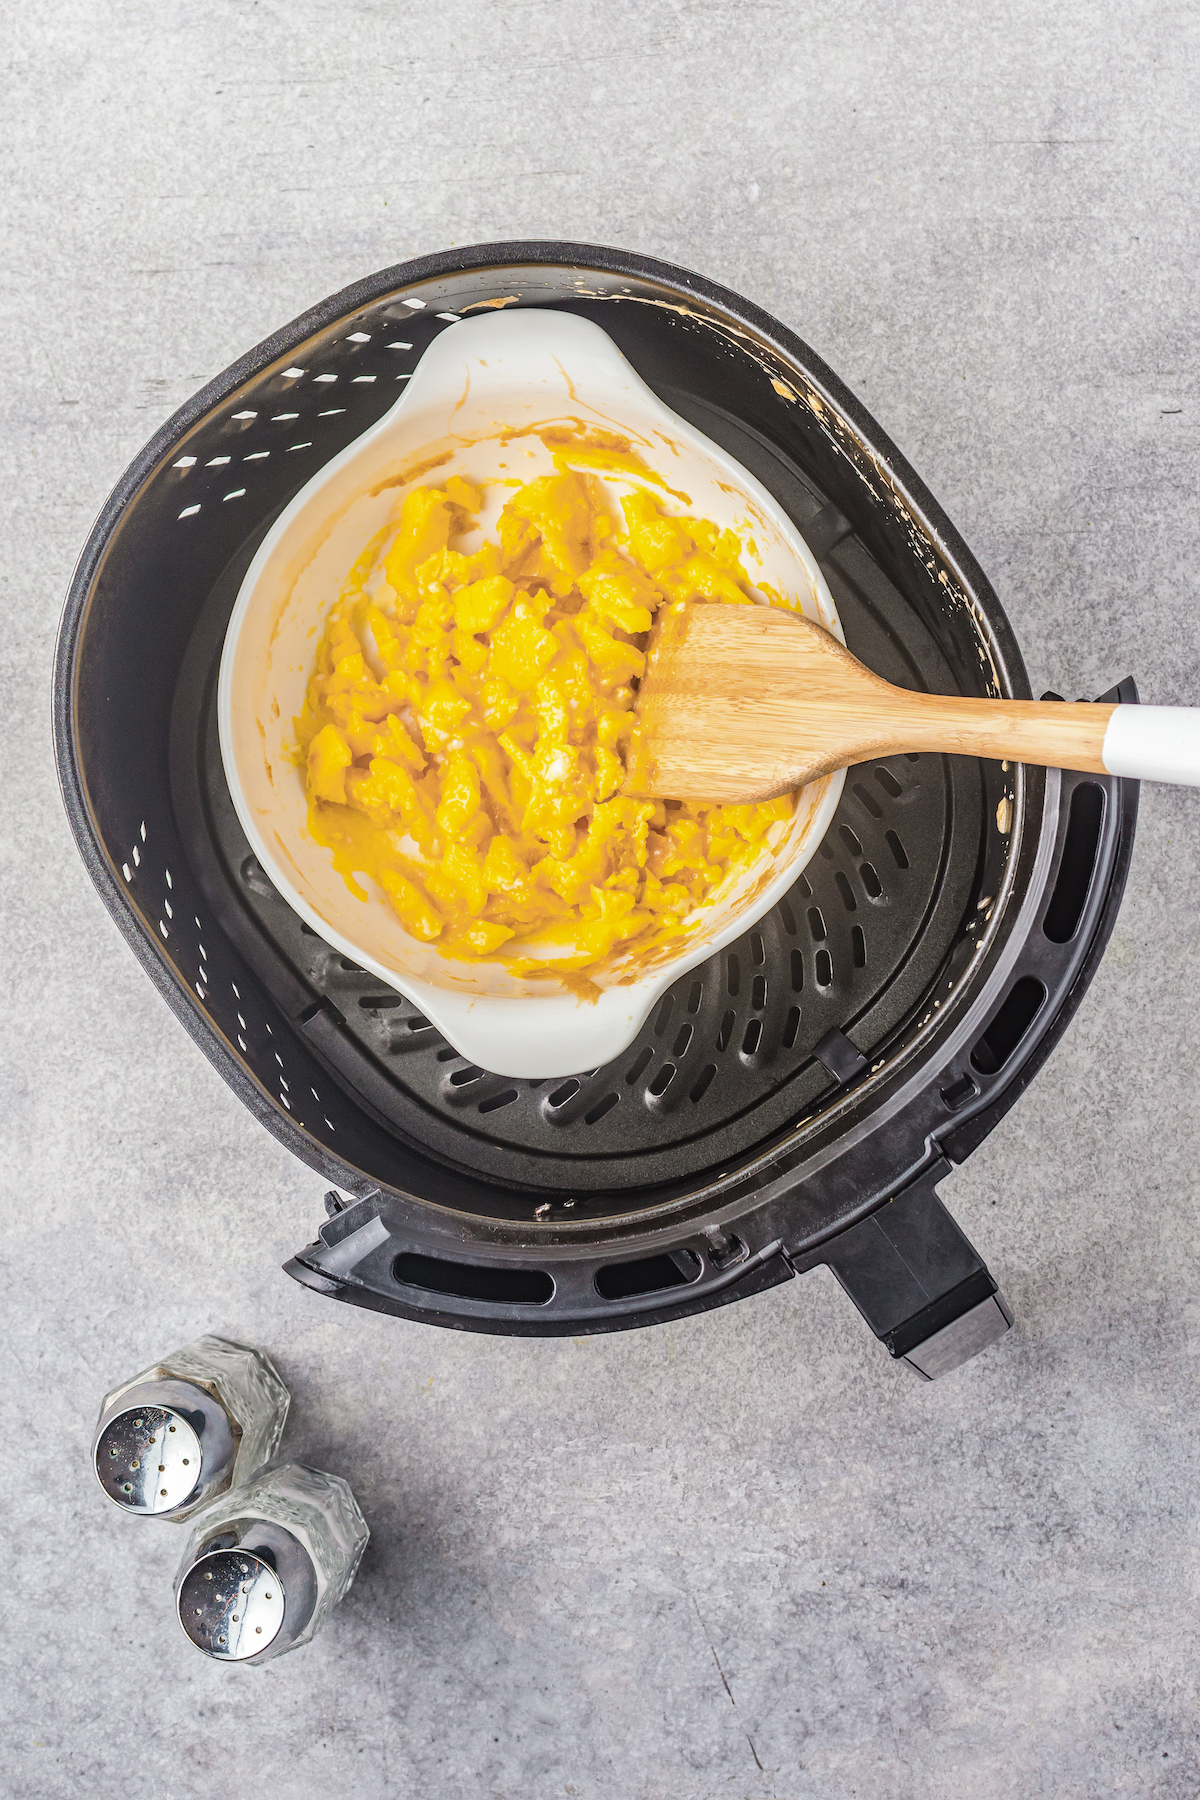 A wooden spoon is used to scramble eggs in a pot inside an air fryer.